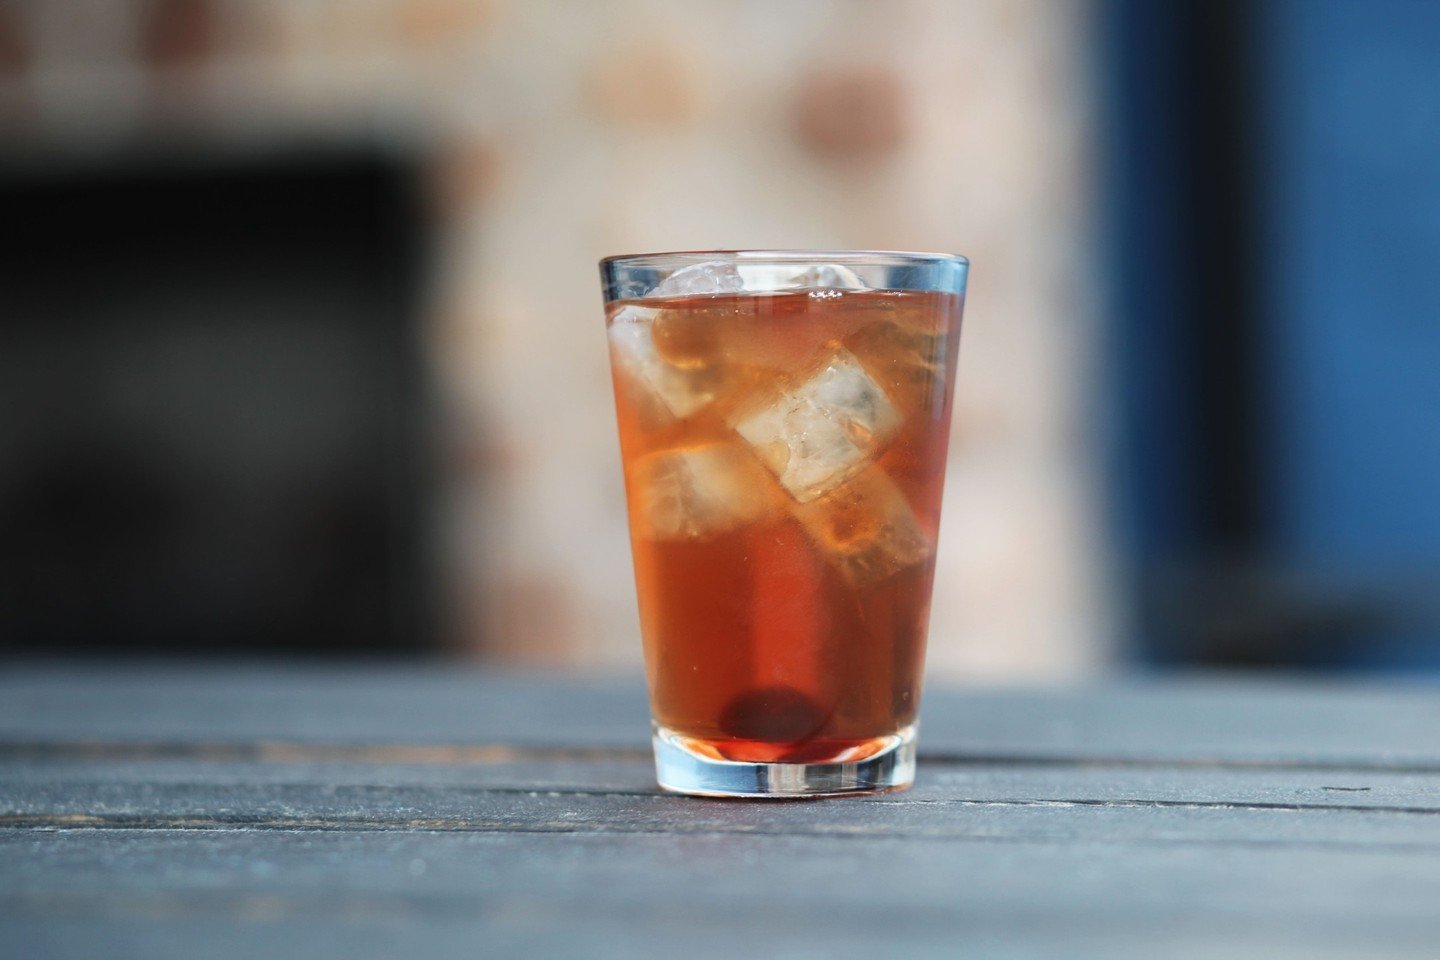 It&rsquo;s World Whiskey Day today and we&rsquo;re celebrating with a Whiskey &amp; Coke while we watch the afternoon baseball games! We open at 11am and the White Sox play at 12:05pm. The Cubs game is on at 1:20, NBA playoffs continue later tonight!